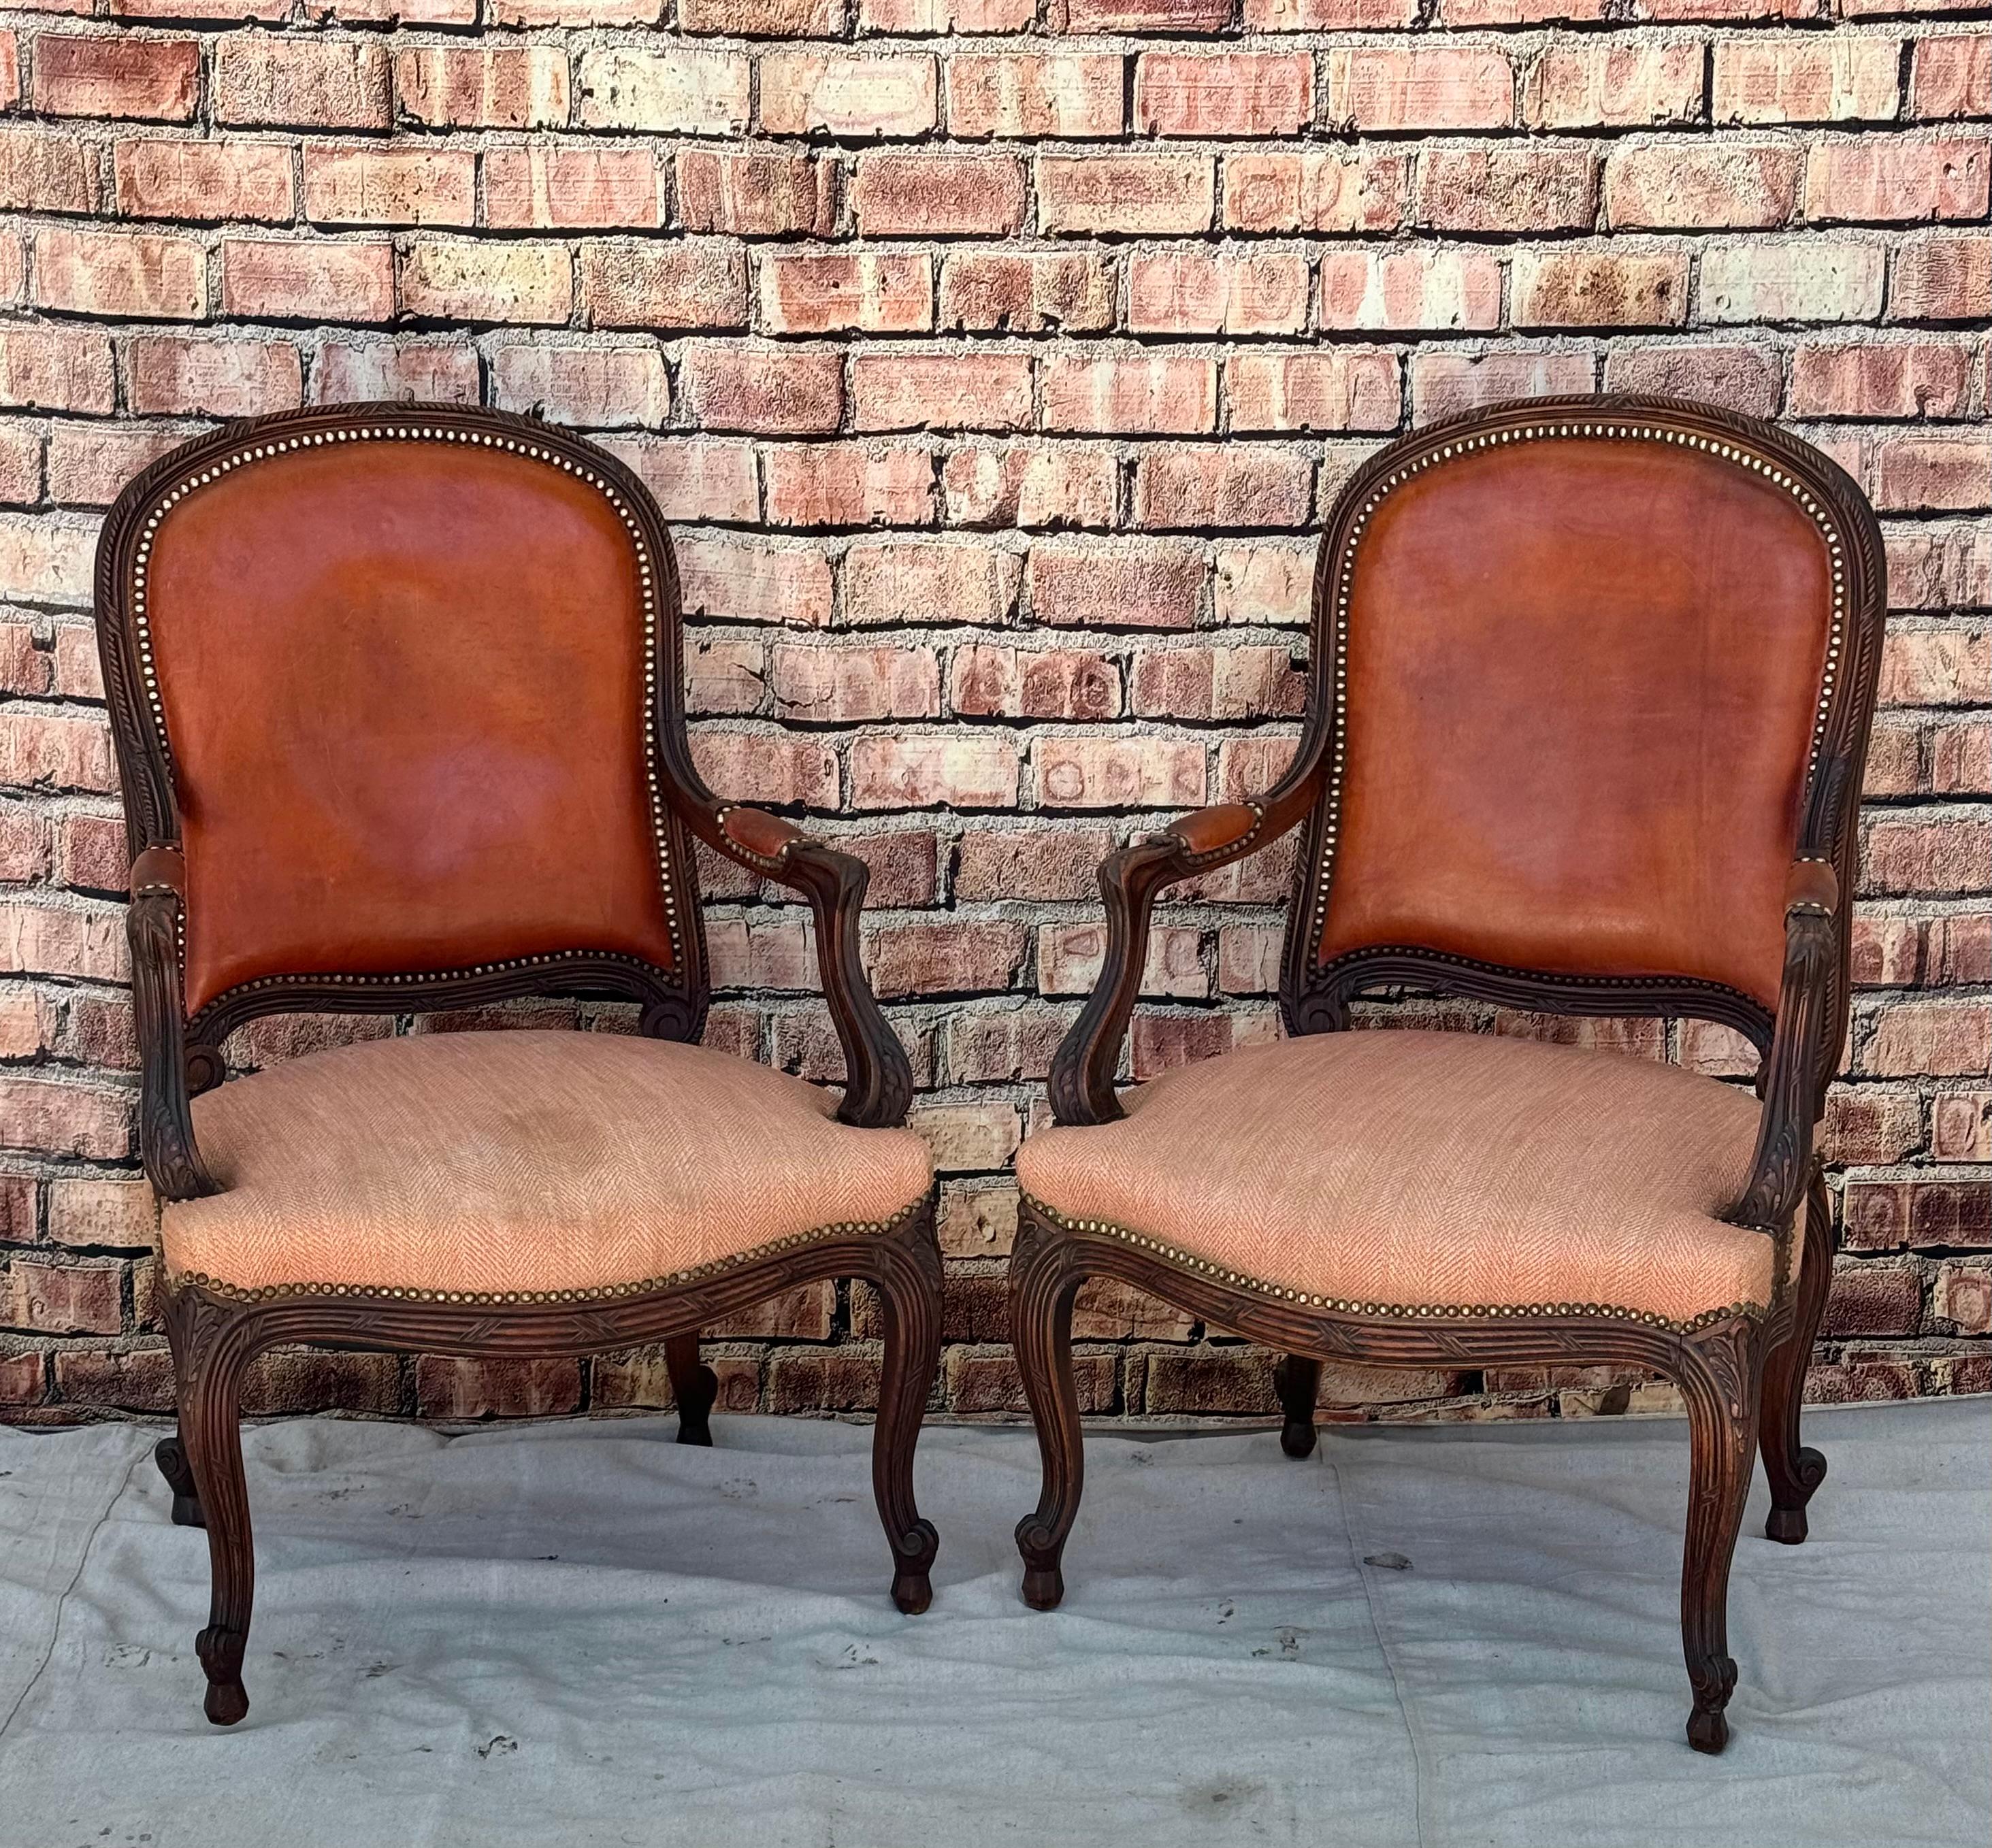 Pair Of Louis XV Style Fauteuil Arm Chairs In Good Condition For Sale In Bradenton, FL